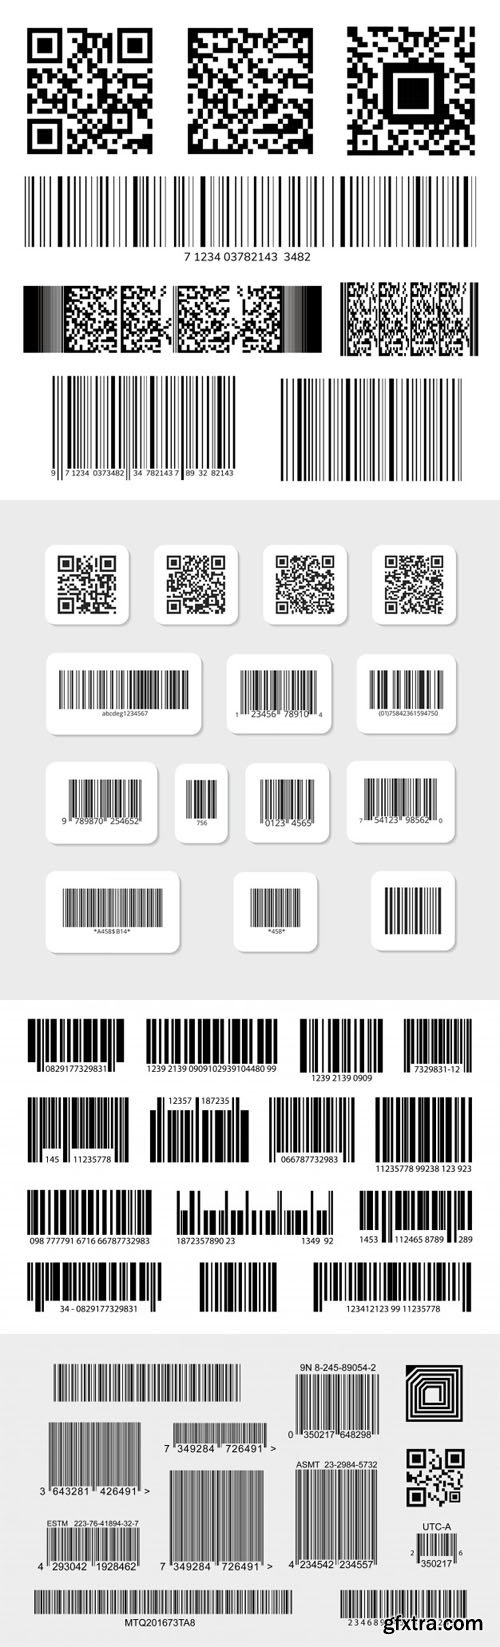 48 Various Digital Barcode Labels and Stickers Vector Templates